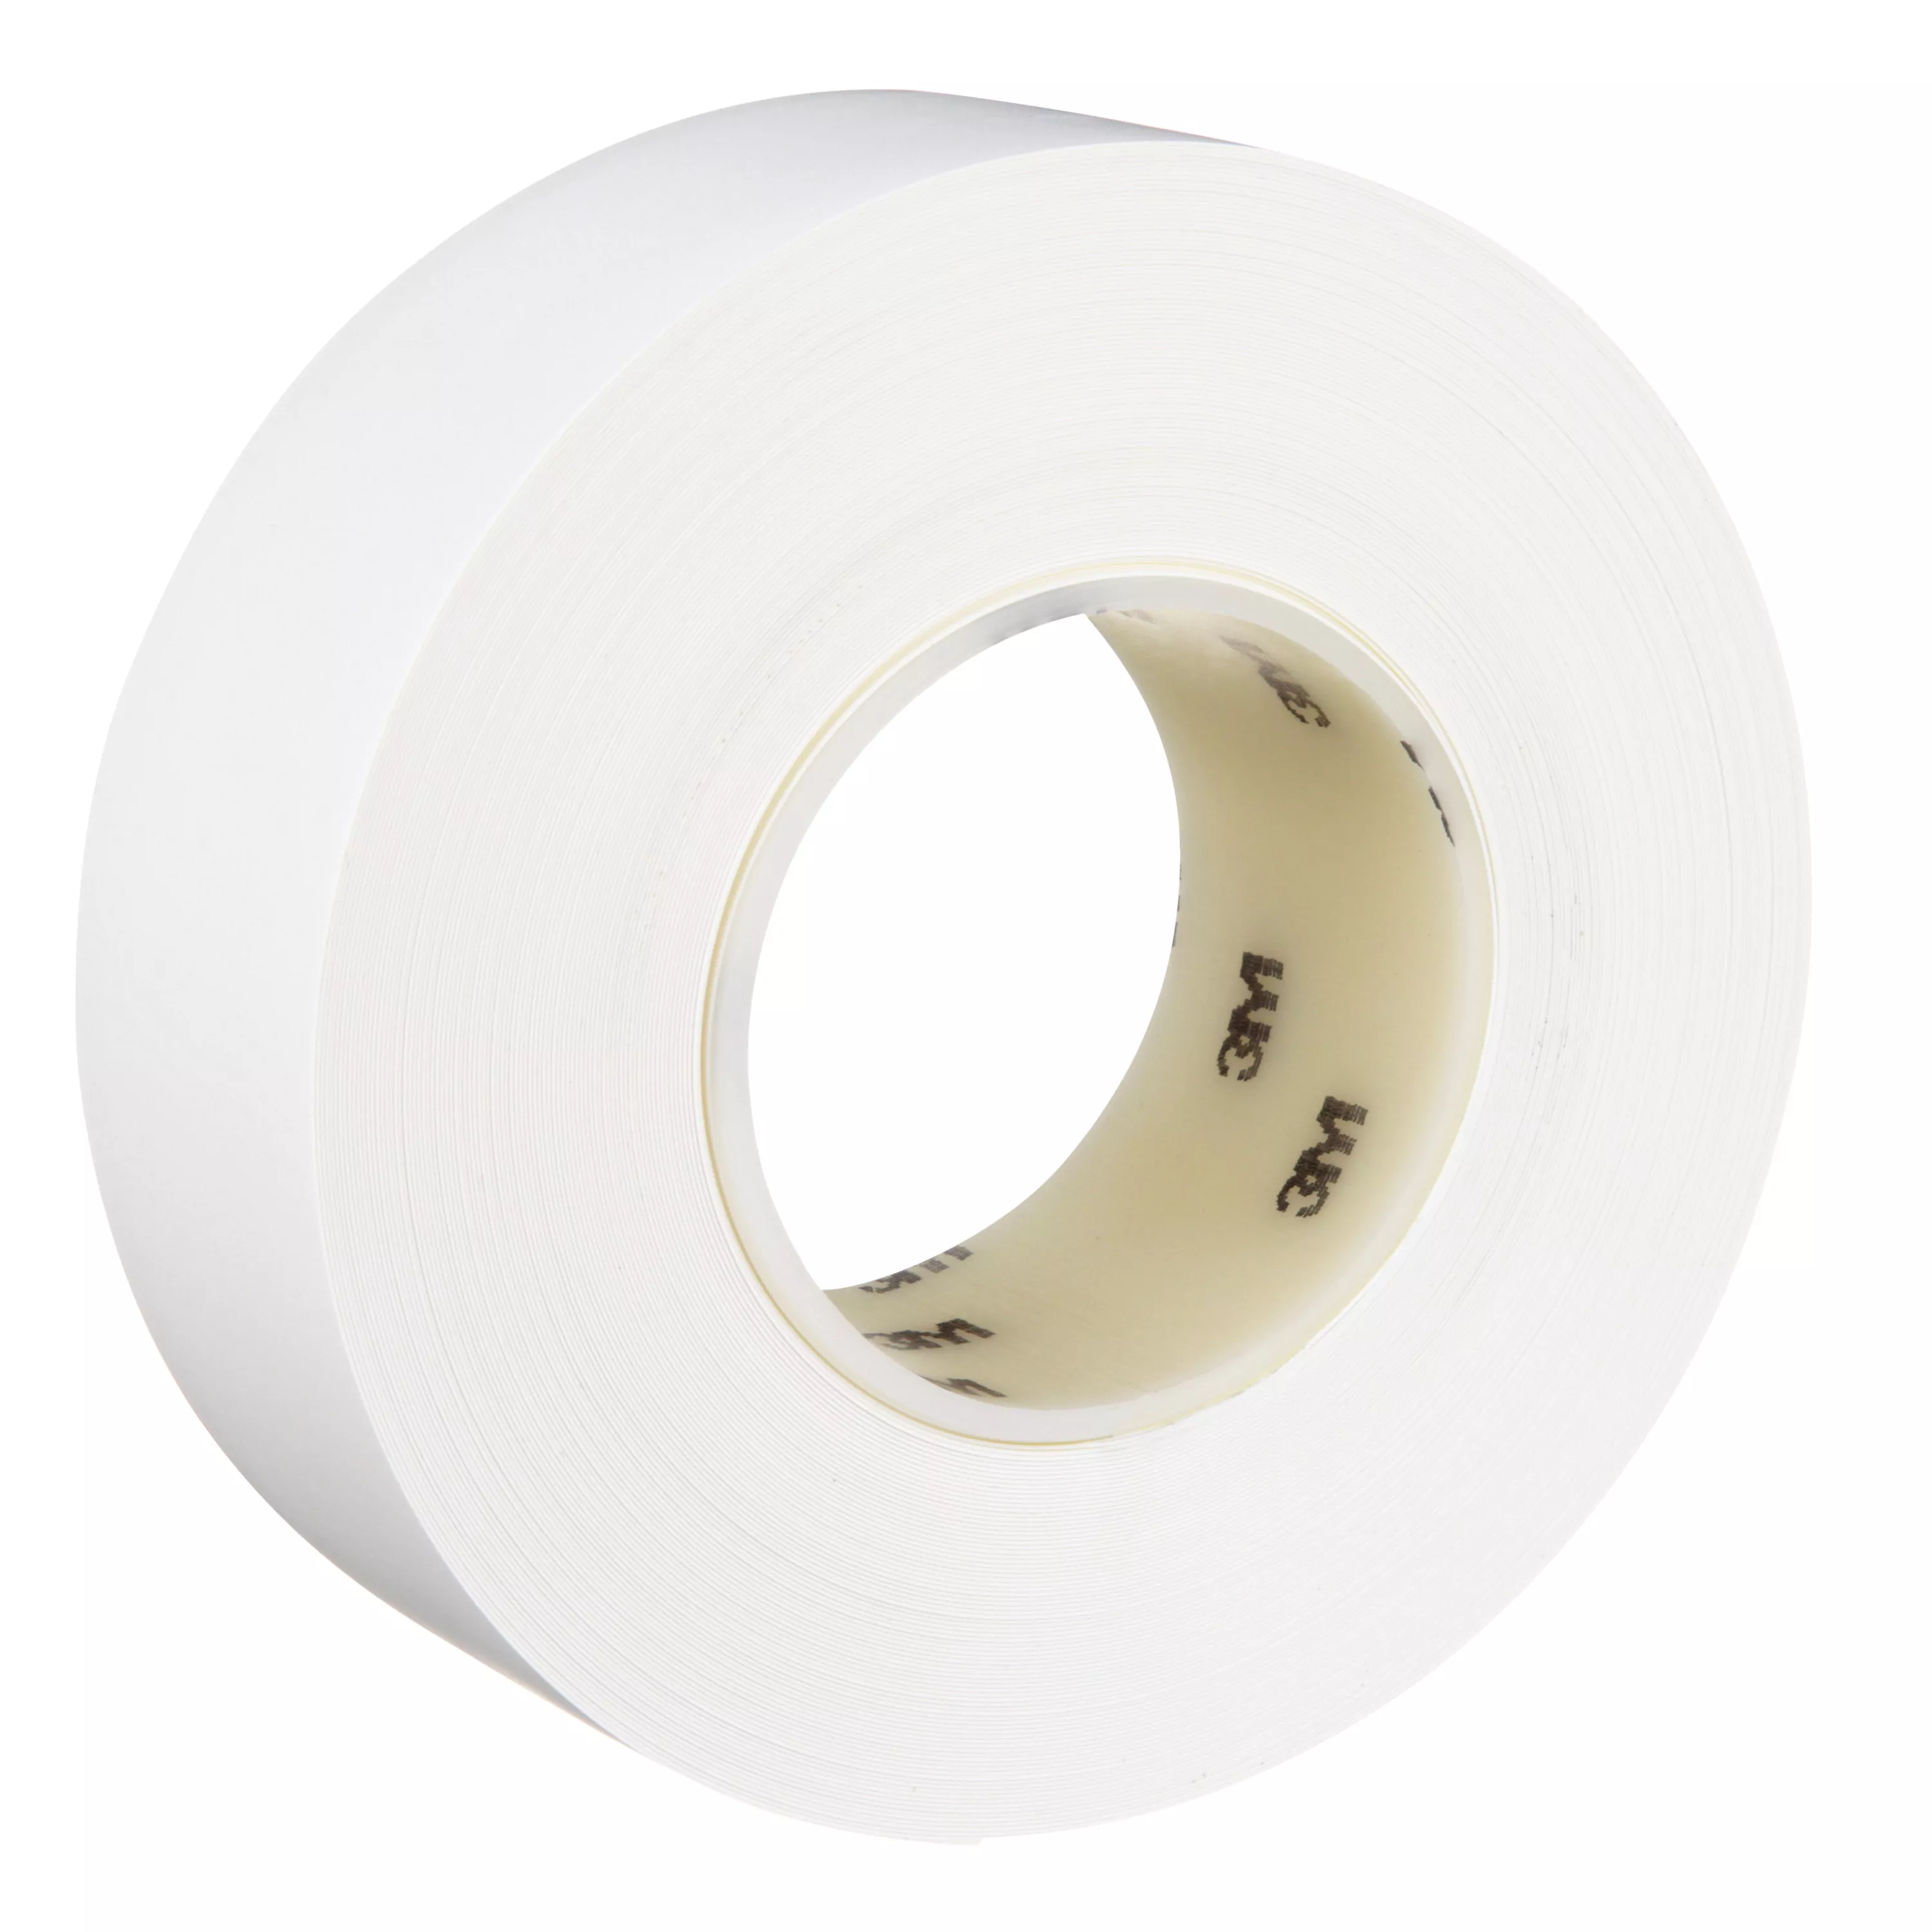 3M™ Durable Floor Marking Tape 971, White, 2 in x 36 yd, 17 mil, 6 Rolls/Case, Individually Wrapped Conveniently Packaged